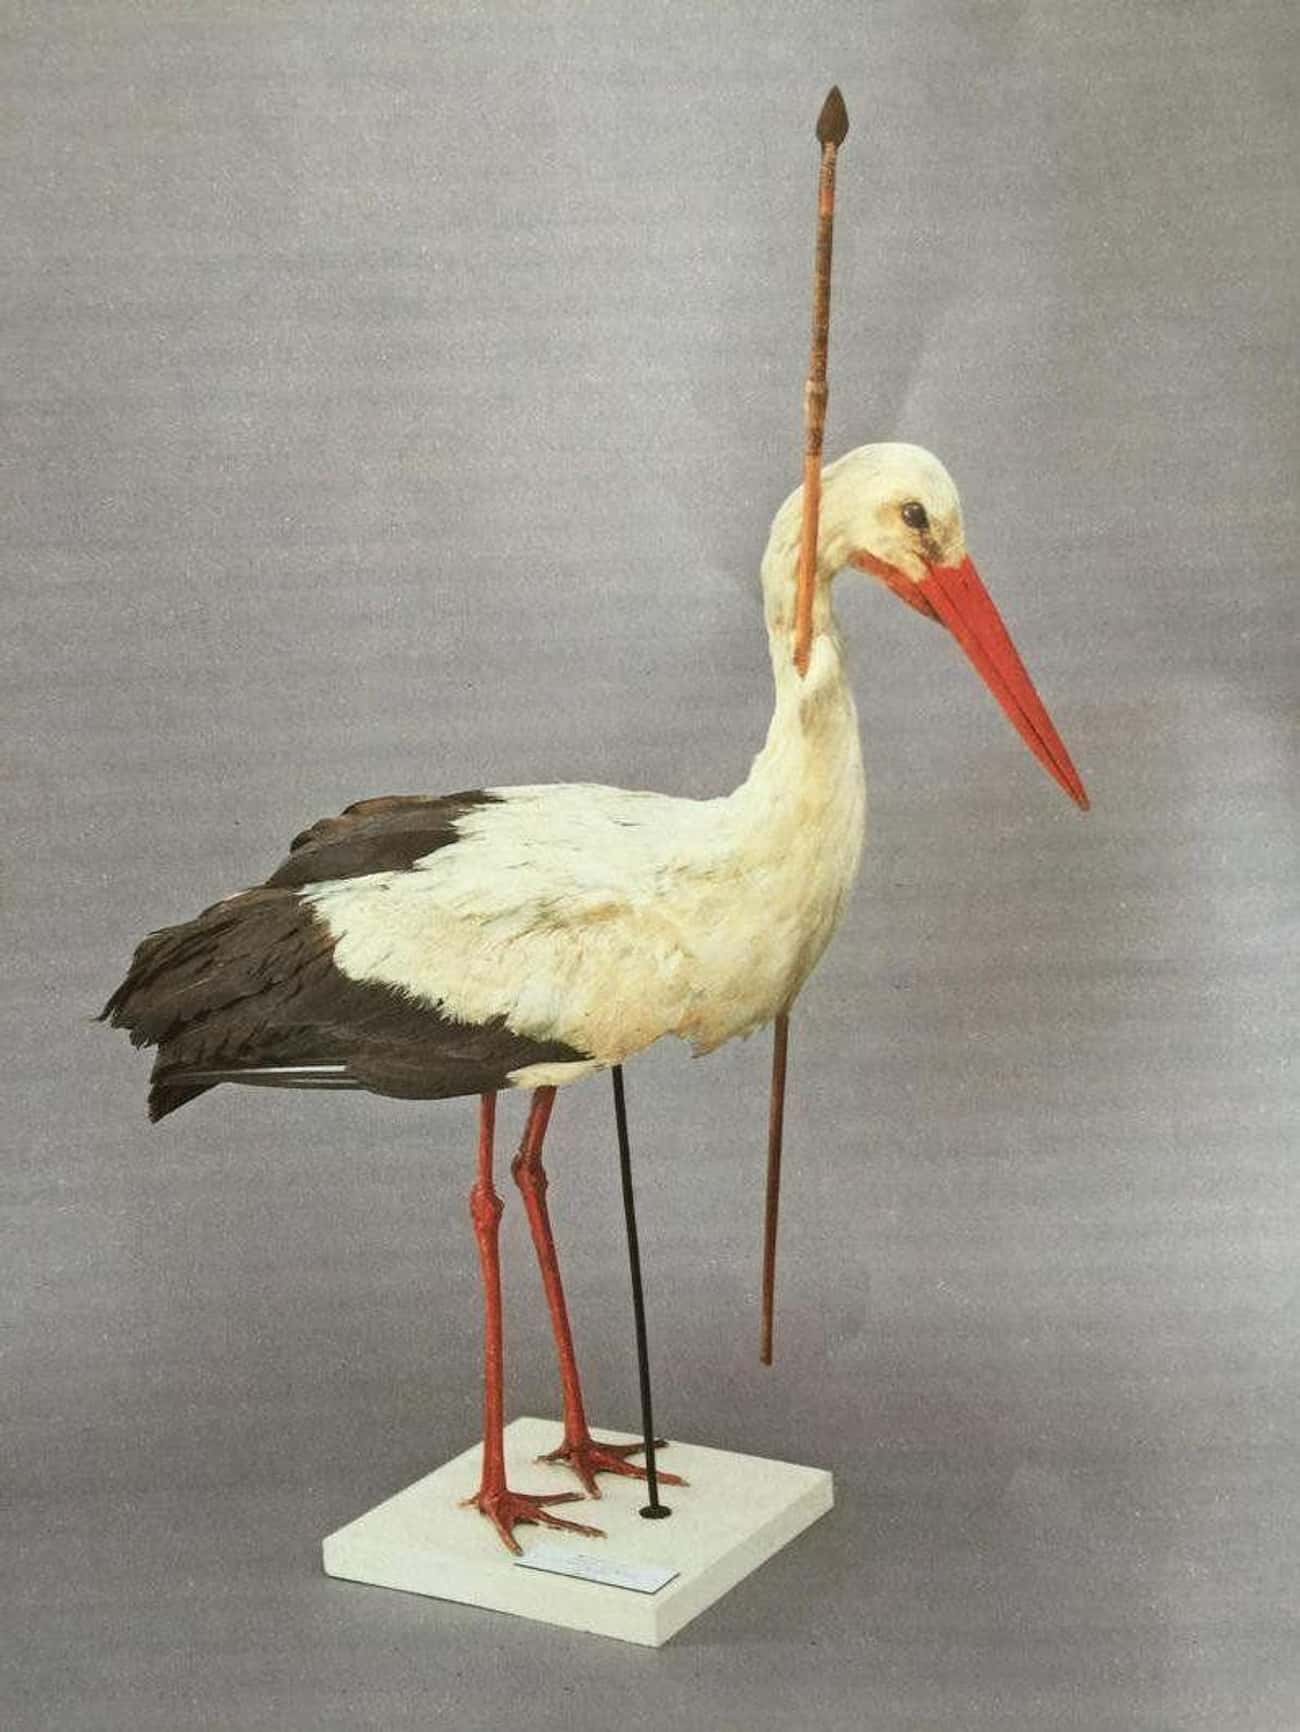 A Stork With A Spear In Its Neck In 1822 Finally Taught Us About Bird Migration